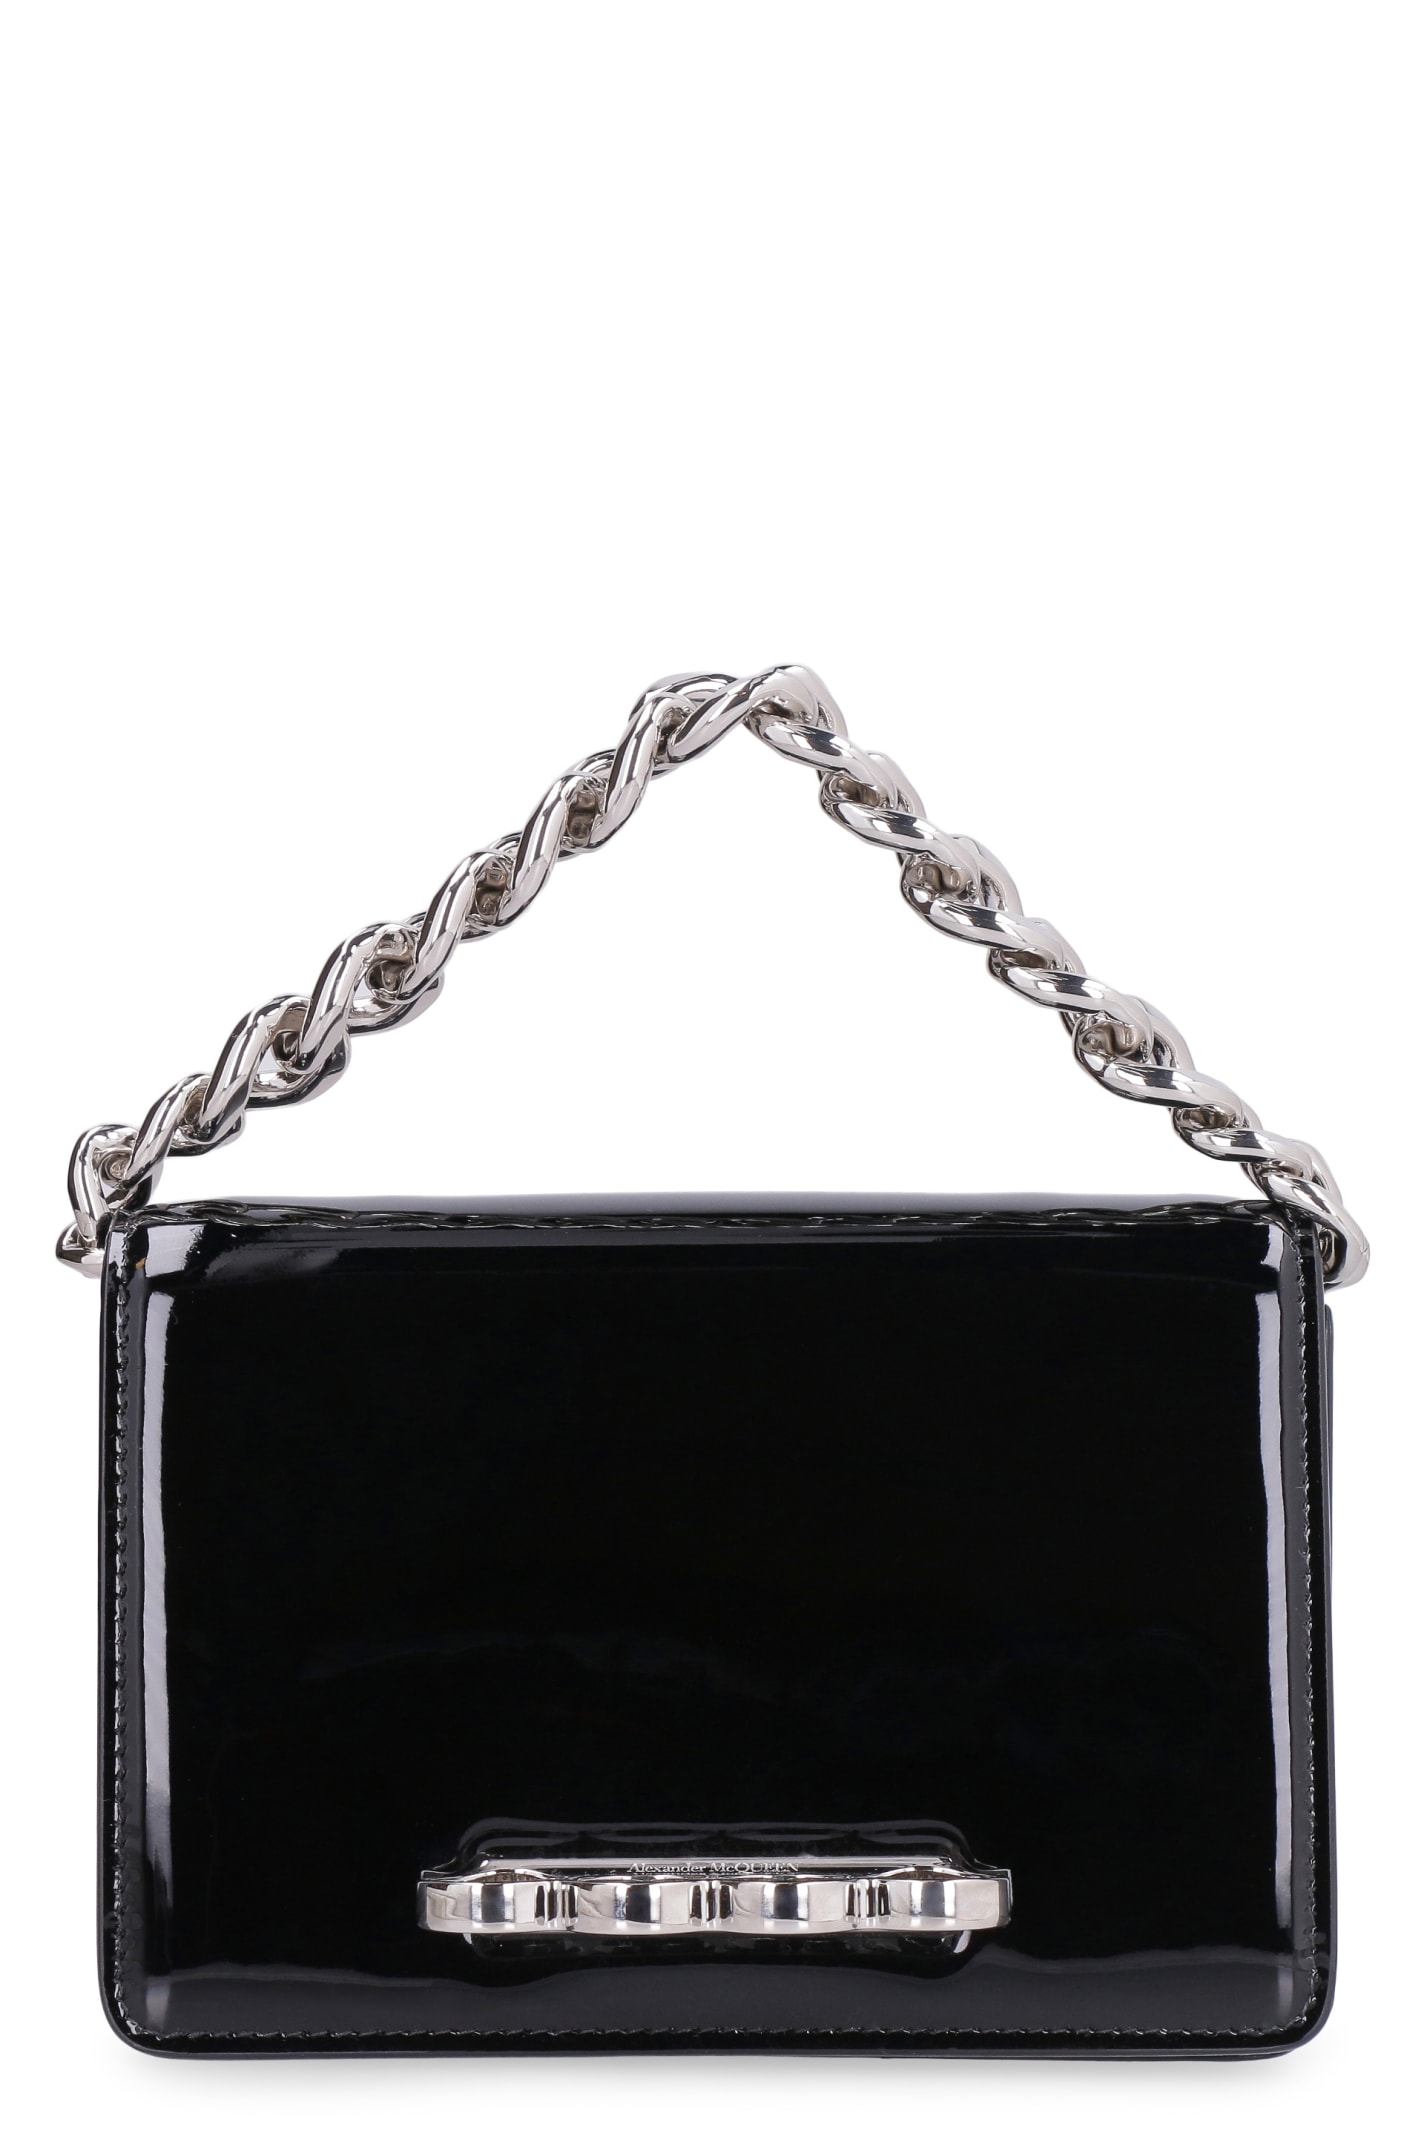 Alexander McQueen The Four Ring Mini Patent Leather Bag